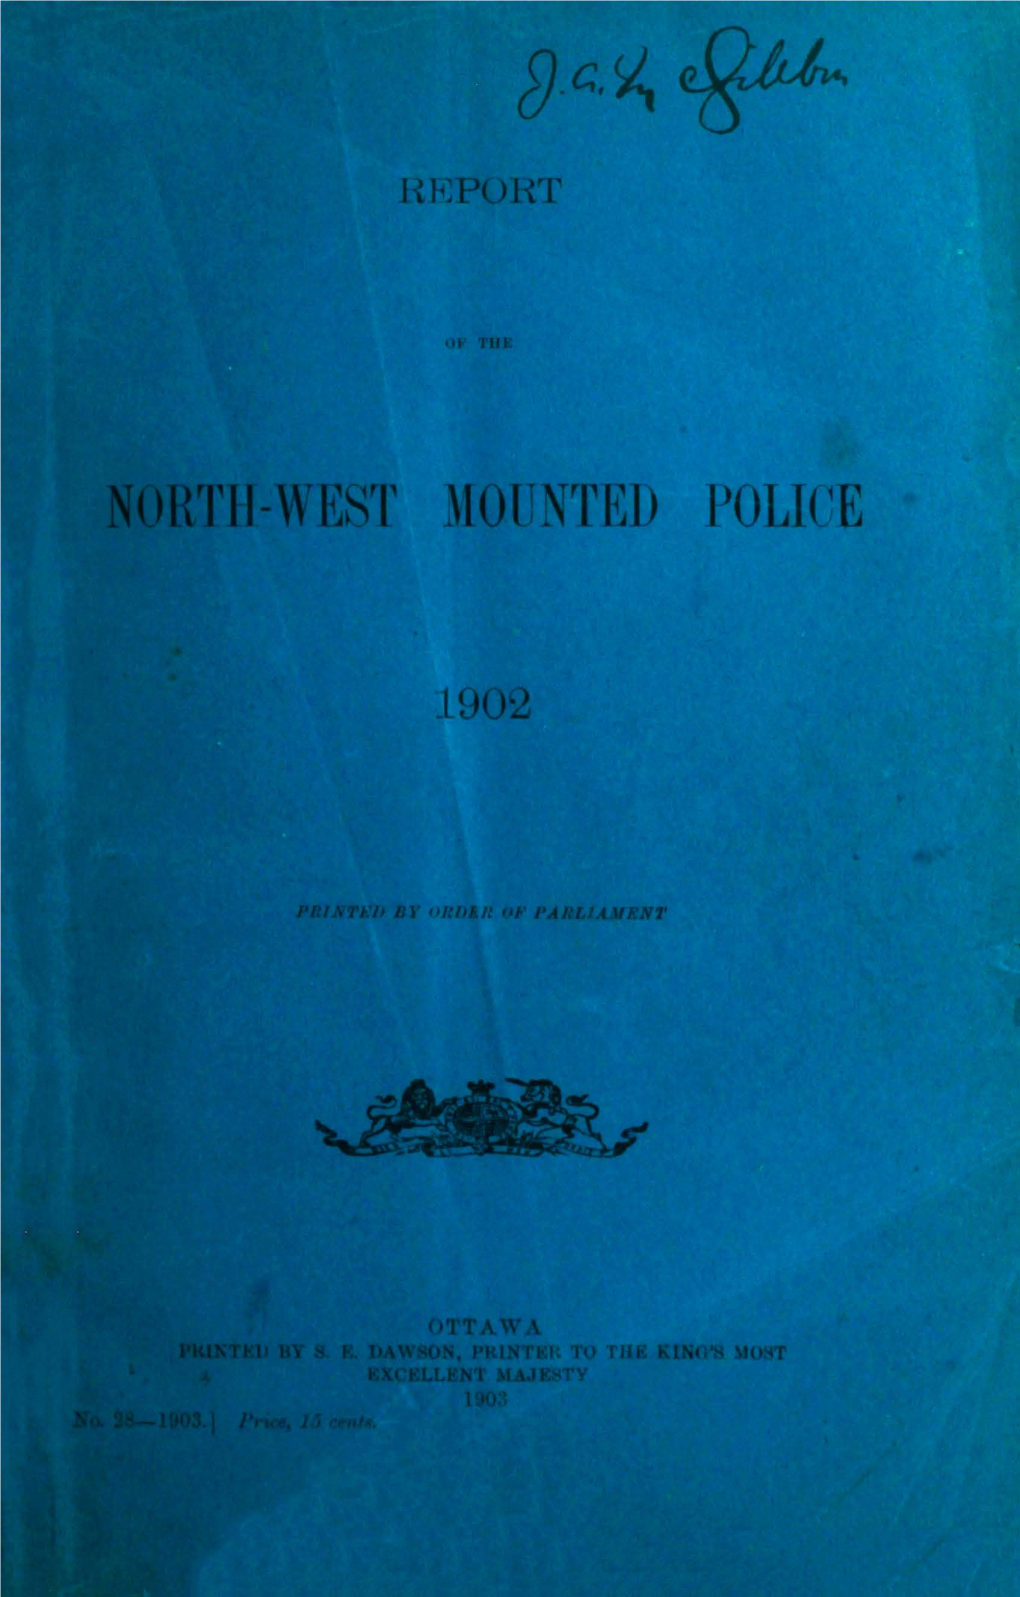 North-West Mounted Police 1902